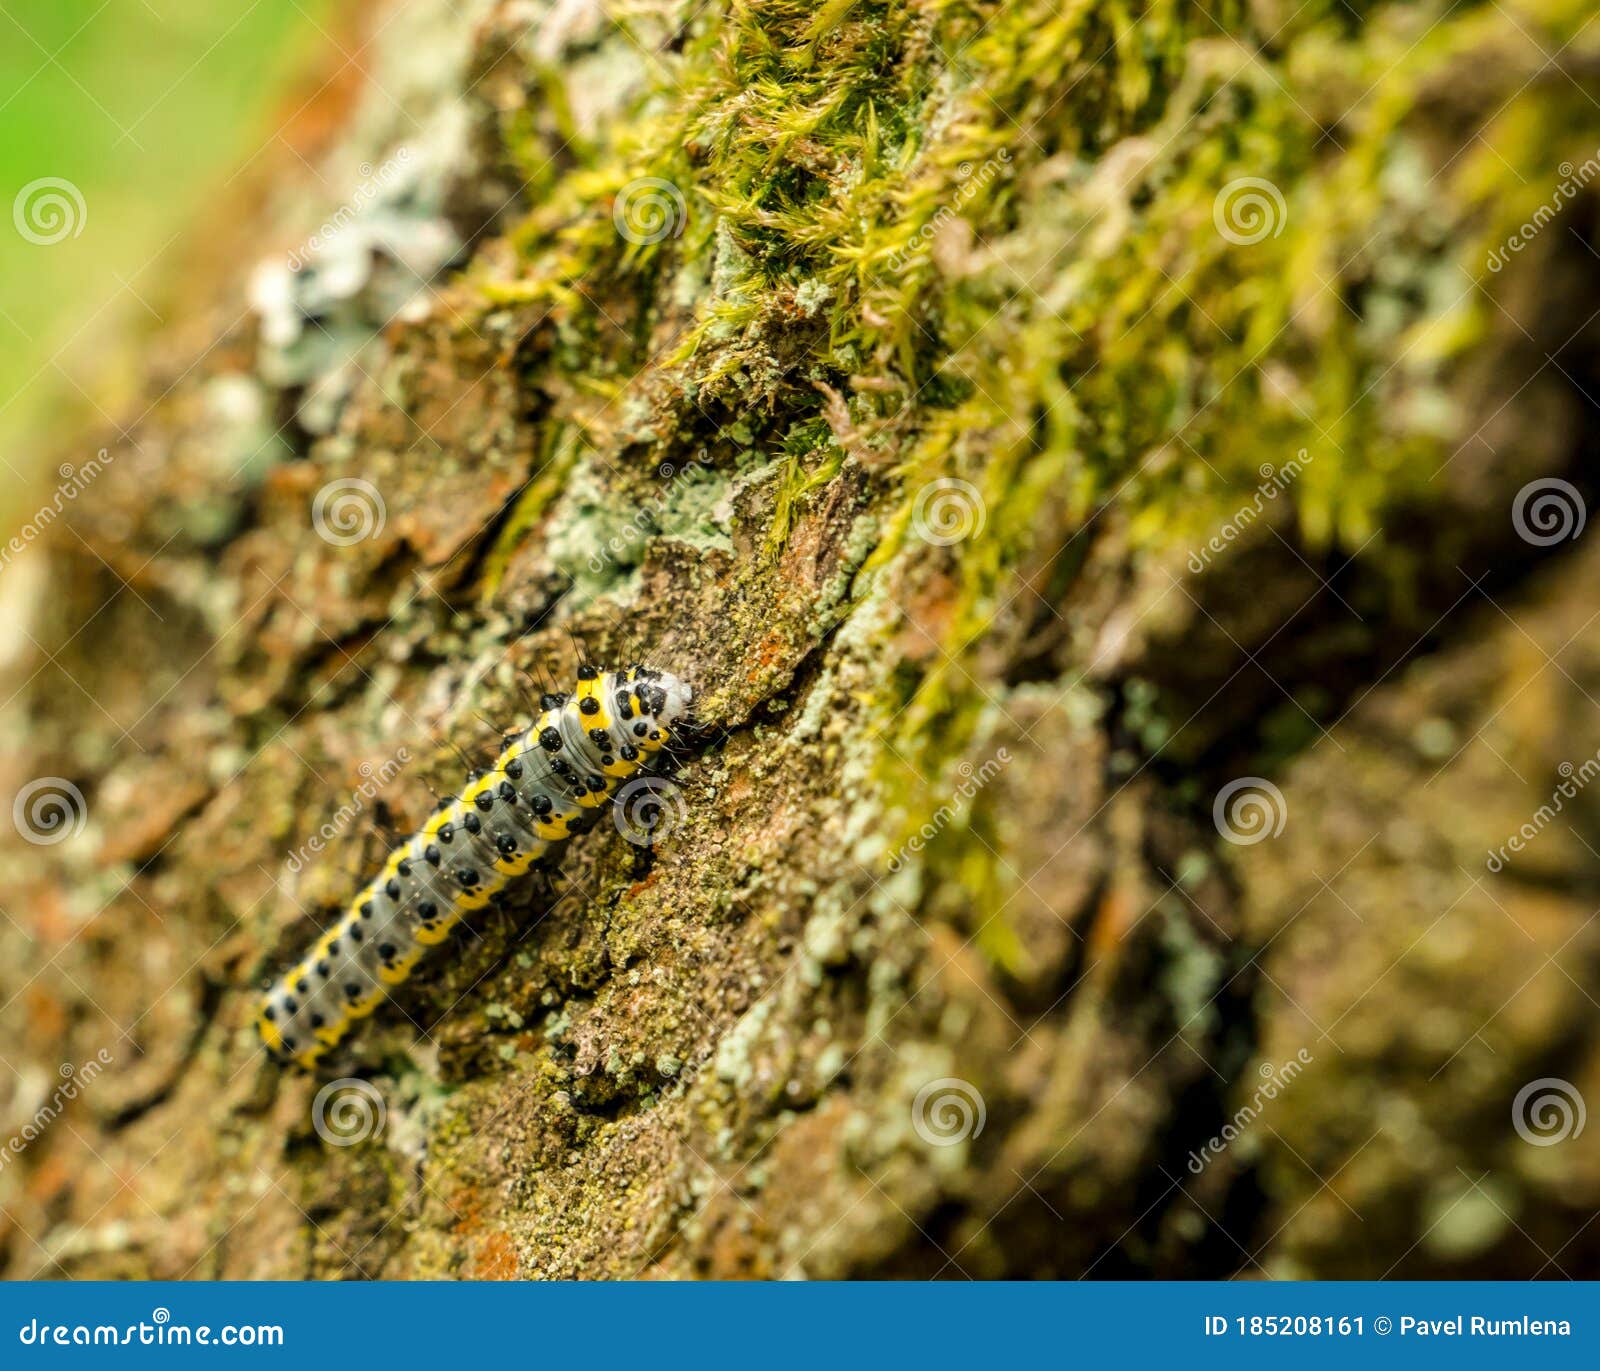 caterpillar with black dots and yellow stripes. toadflax/brocade moth calophasia lunula